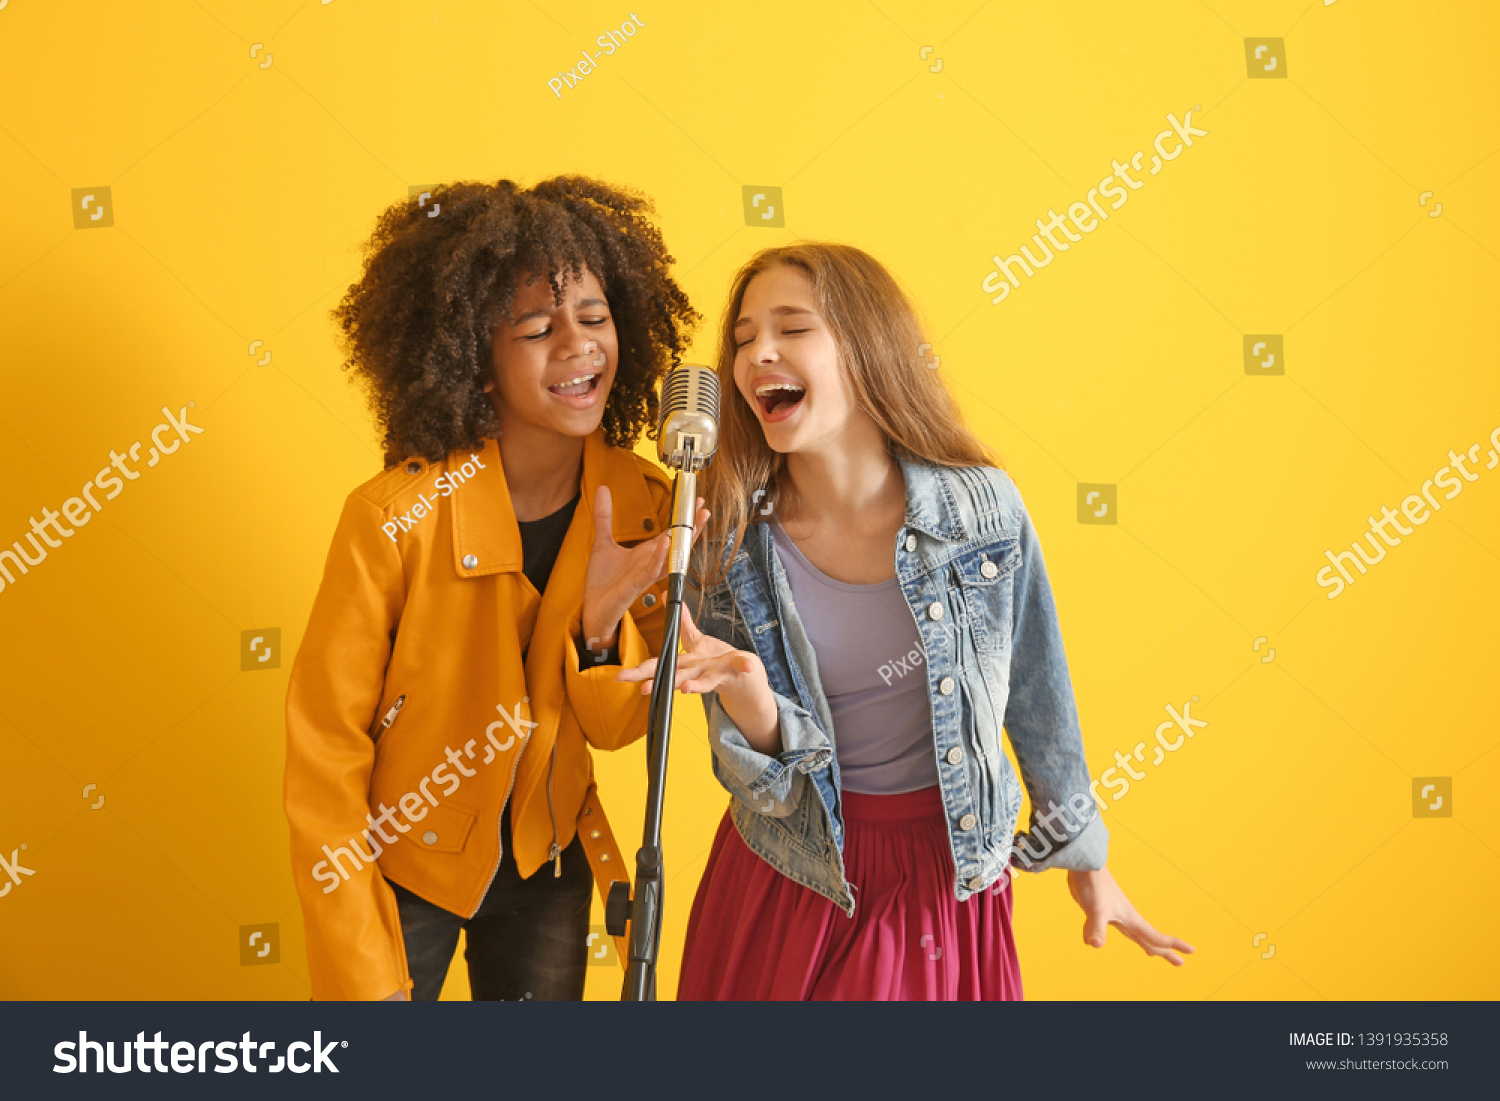 Teenage girls with microphone singing against color background #1391935358